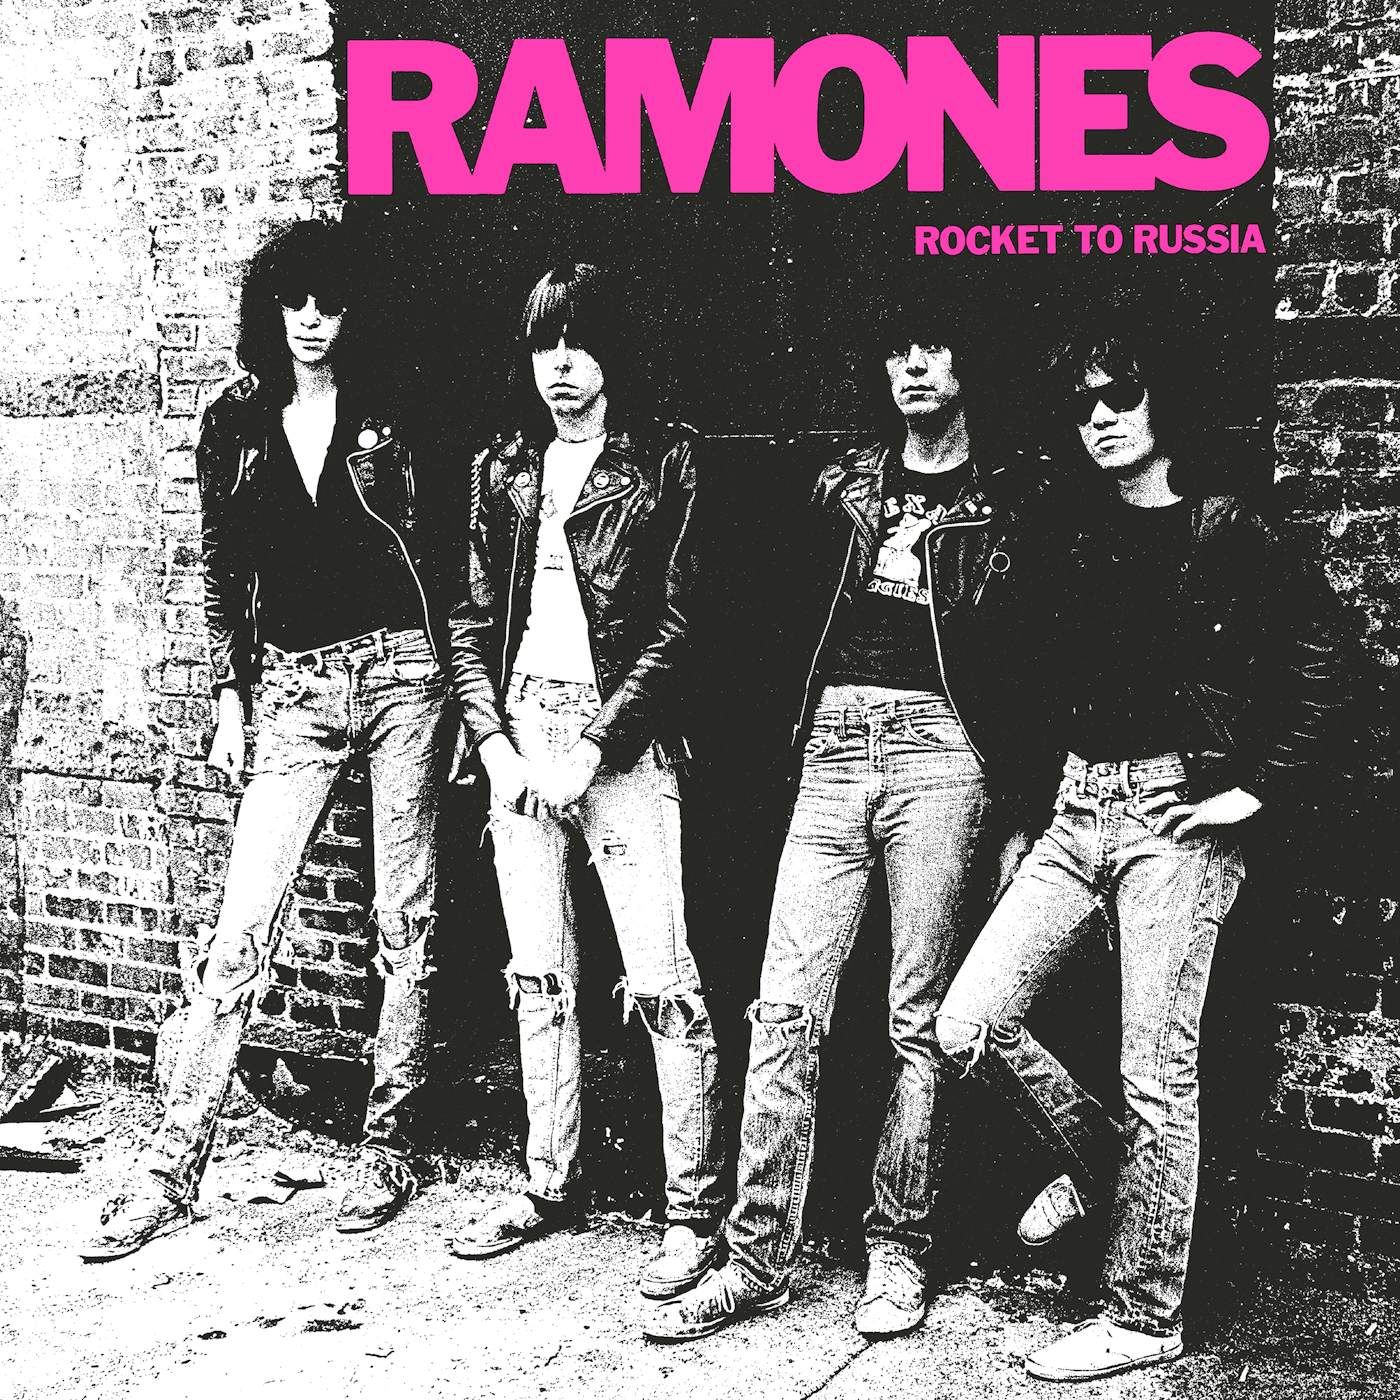 Ramones Rocket To Russia (Limited/180G) Vinyl Record